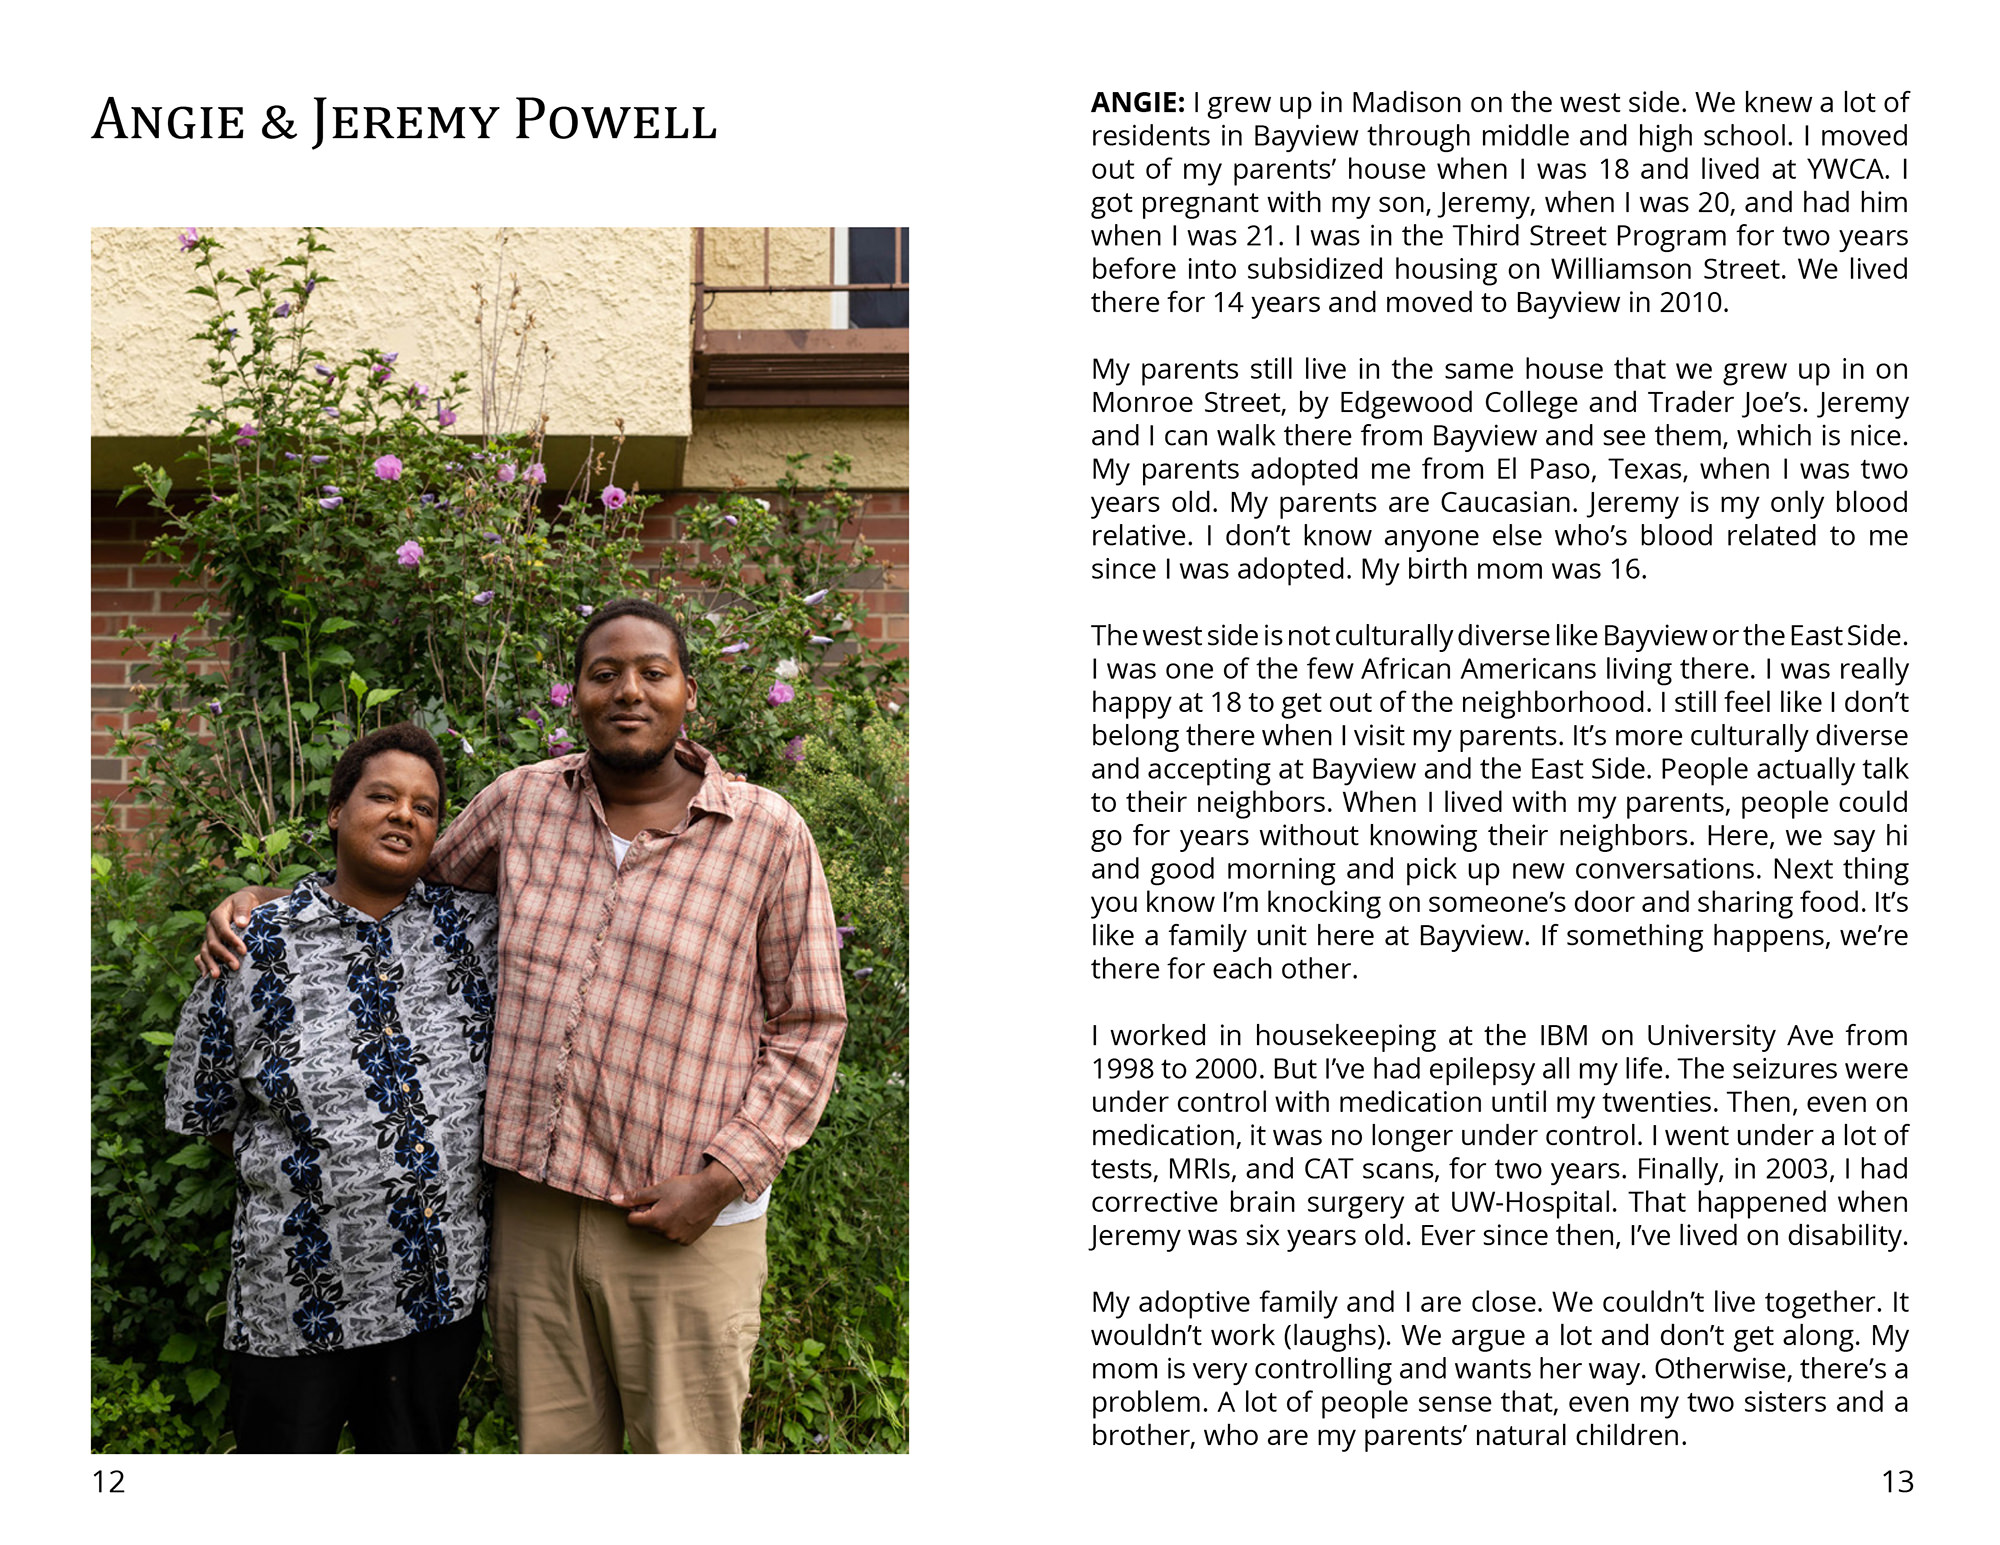 Bayview affordable housing oral histories